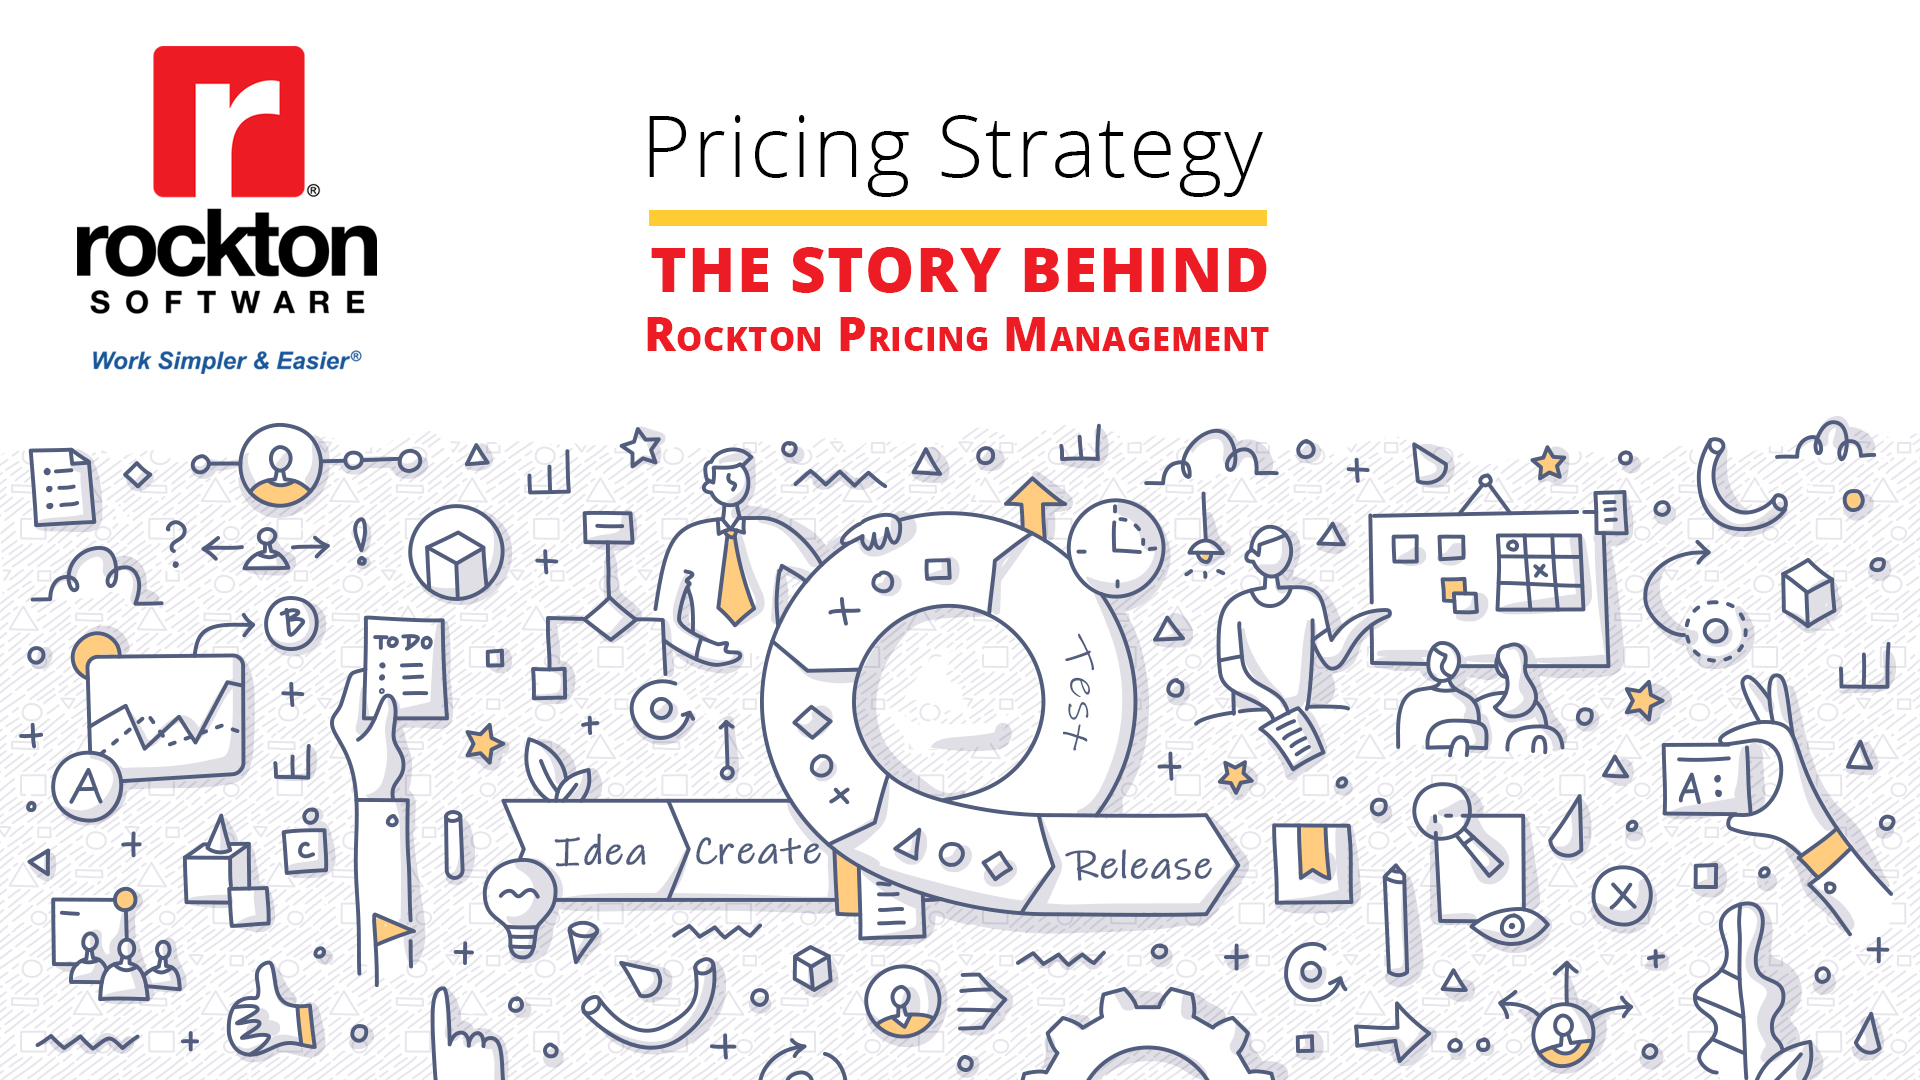 Why We Took on the Pricing and Revenue Management Challenge